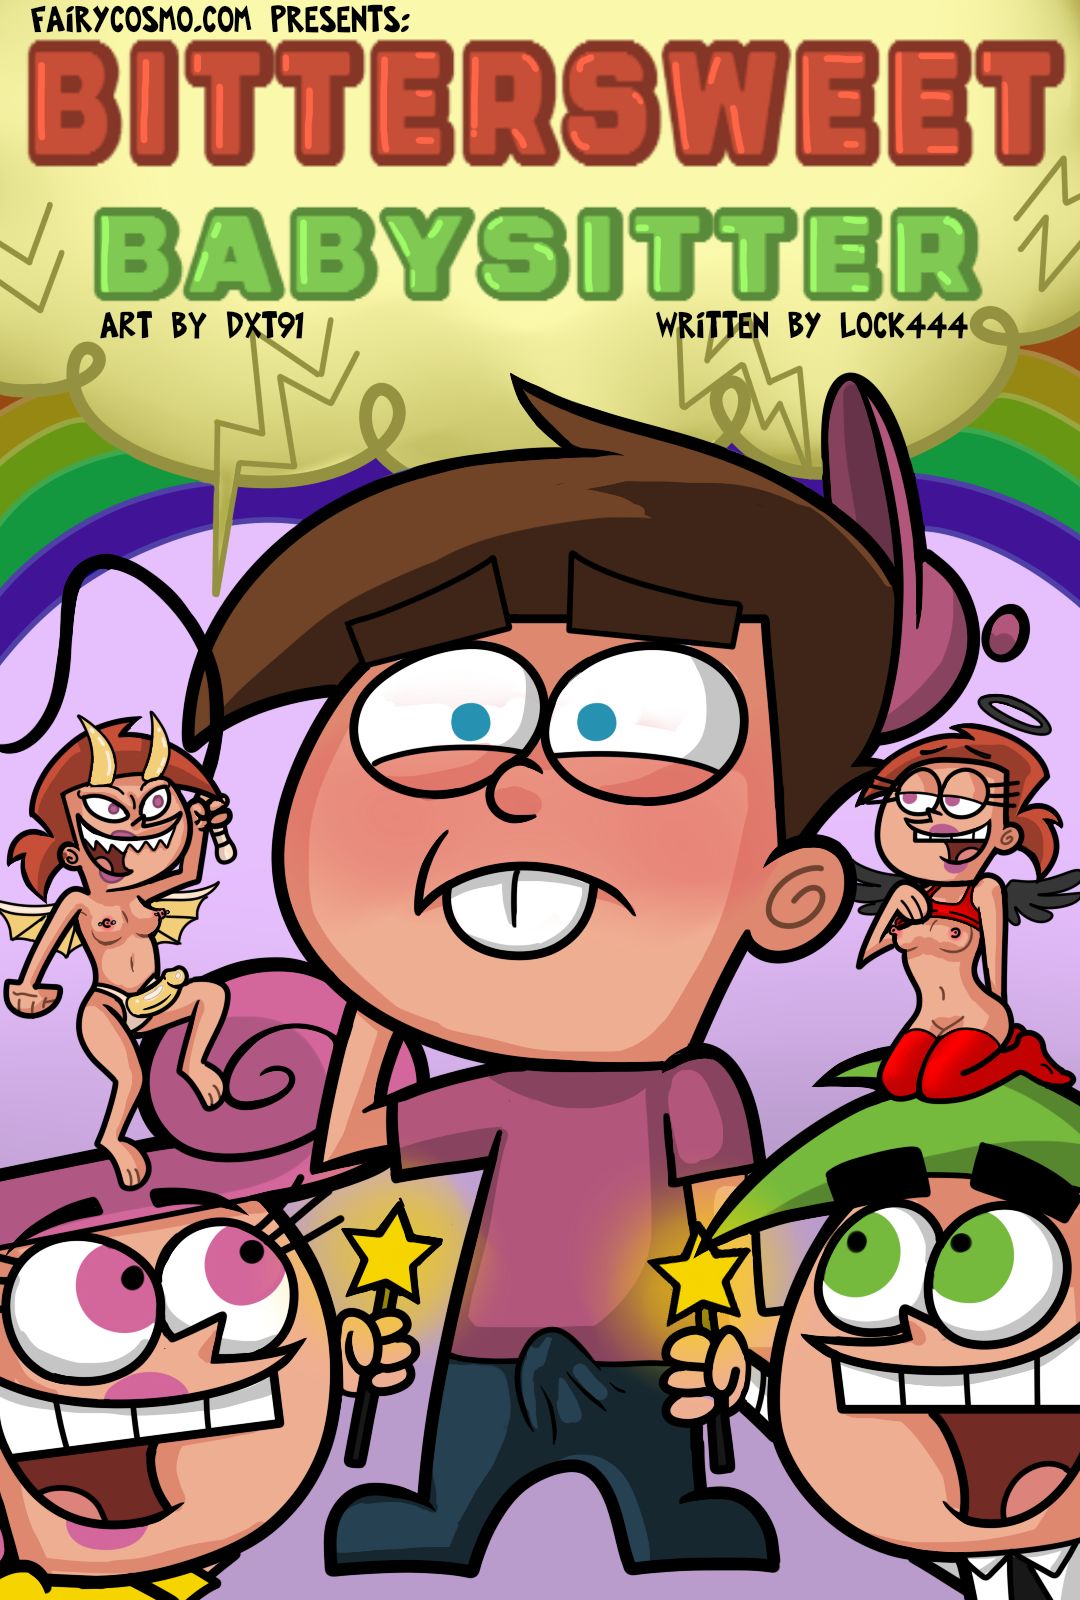 DXT91] Bittersweet Babysitter (The Fairly OddParents) | Porn Comics